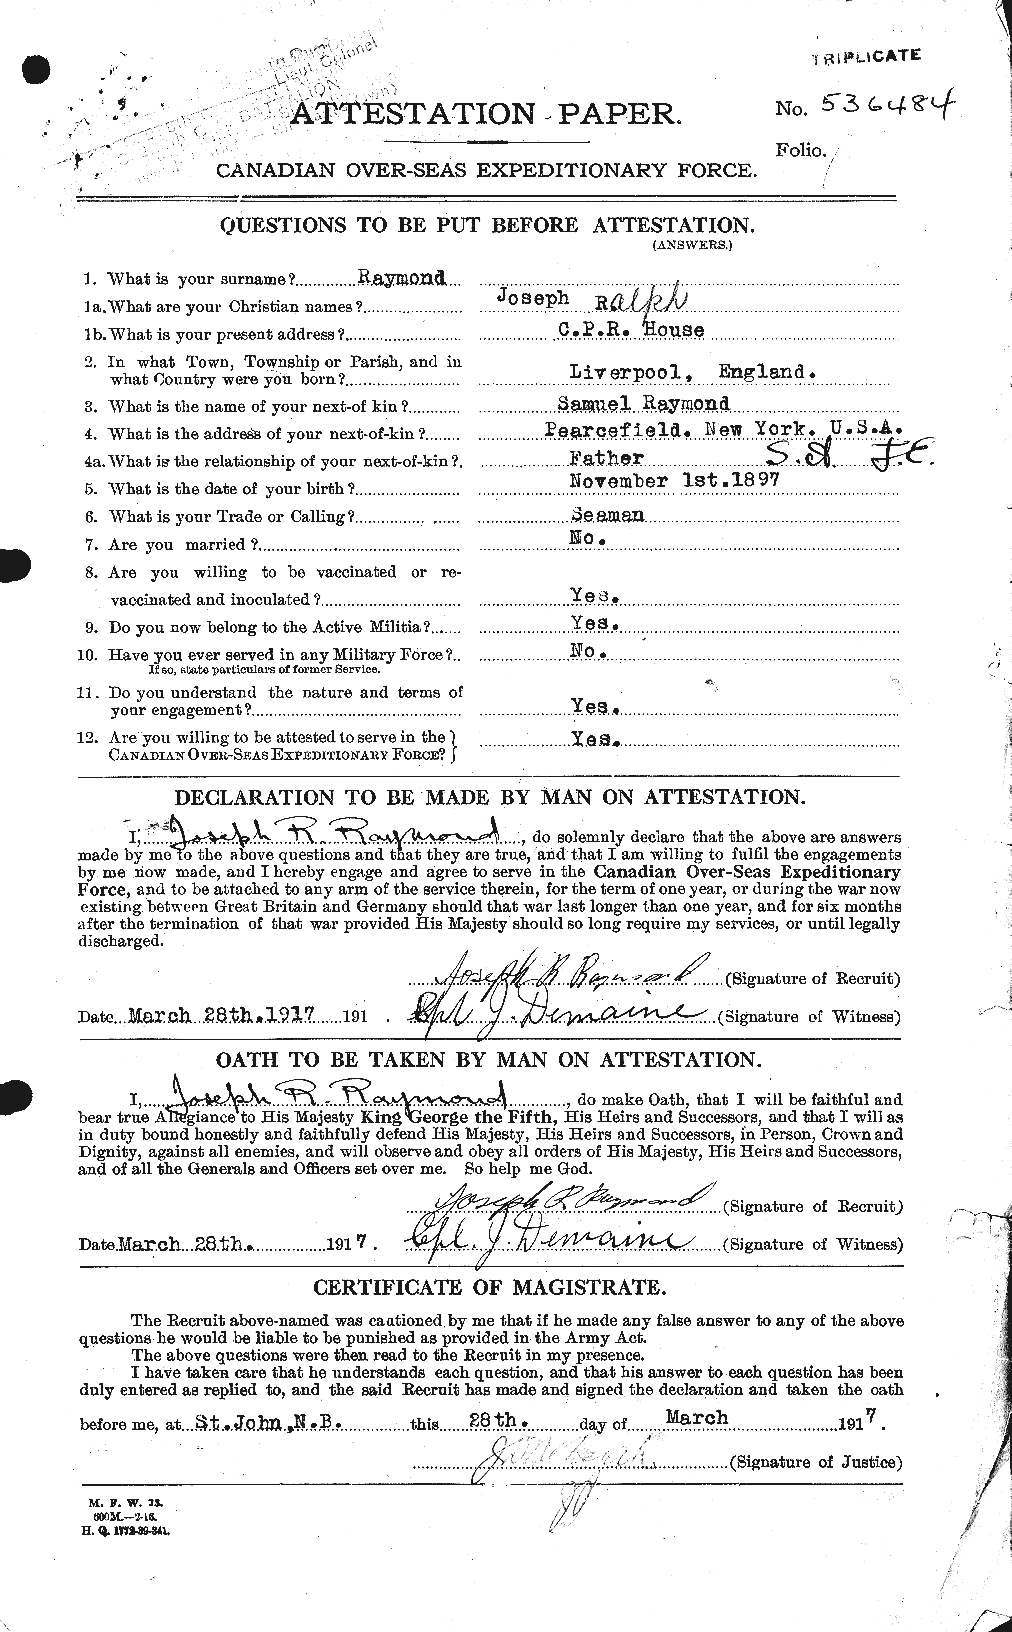 Personnel Records of the First World War - CEF 595401a